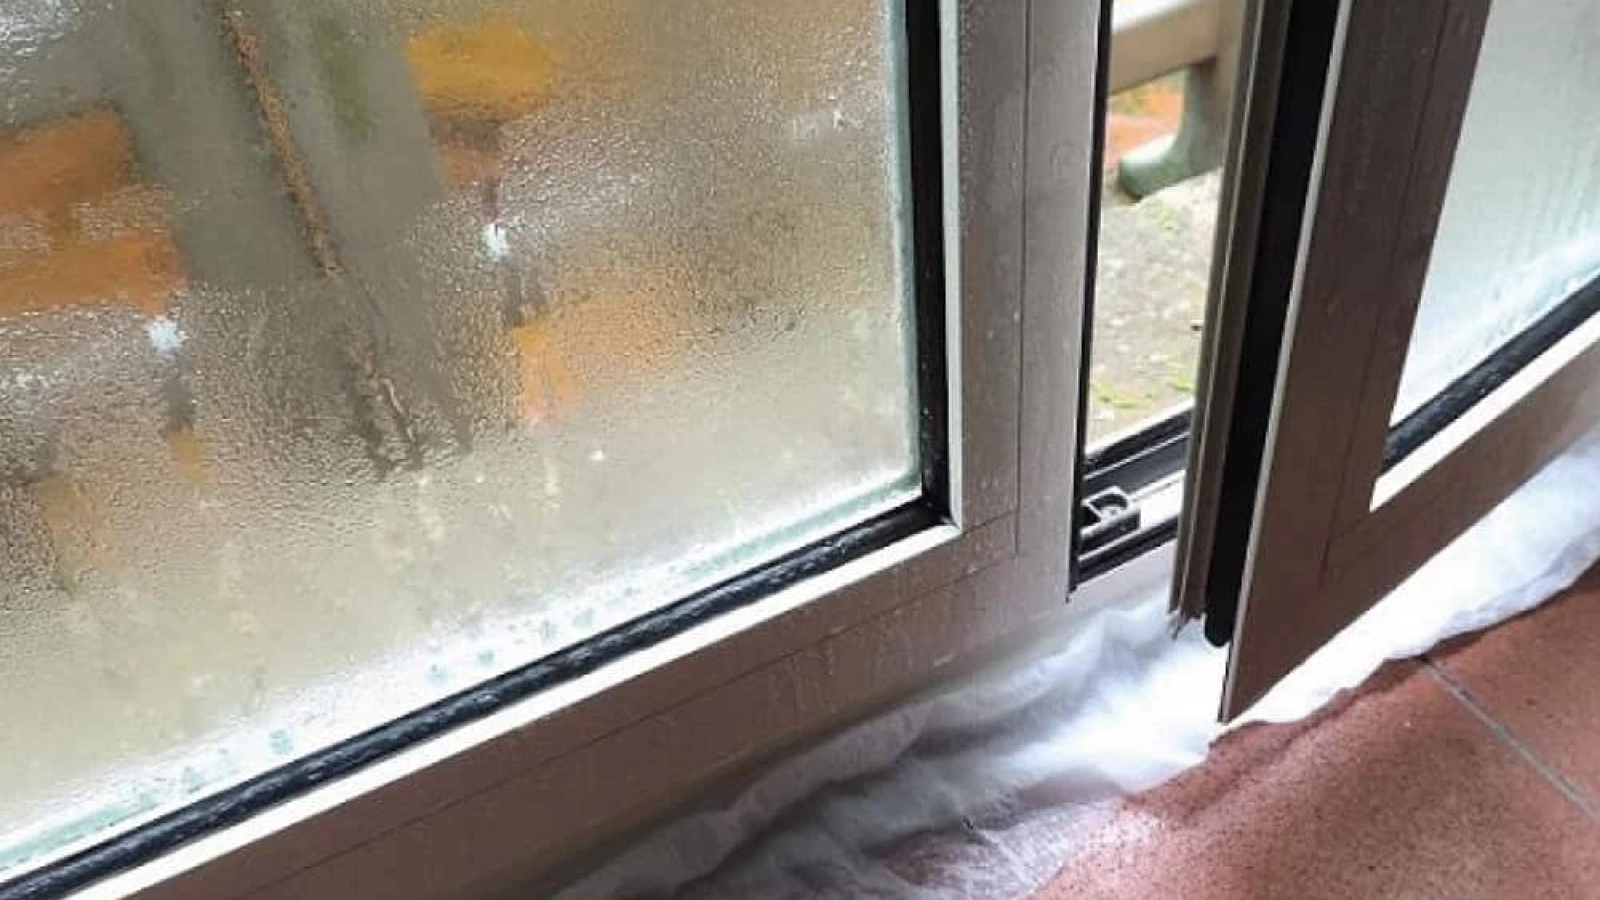 When the window frames are over 15 years old or show mold/moisture between the panes.